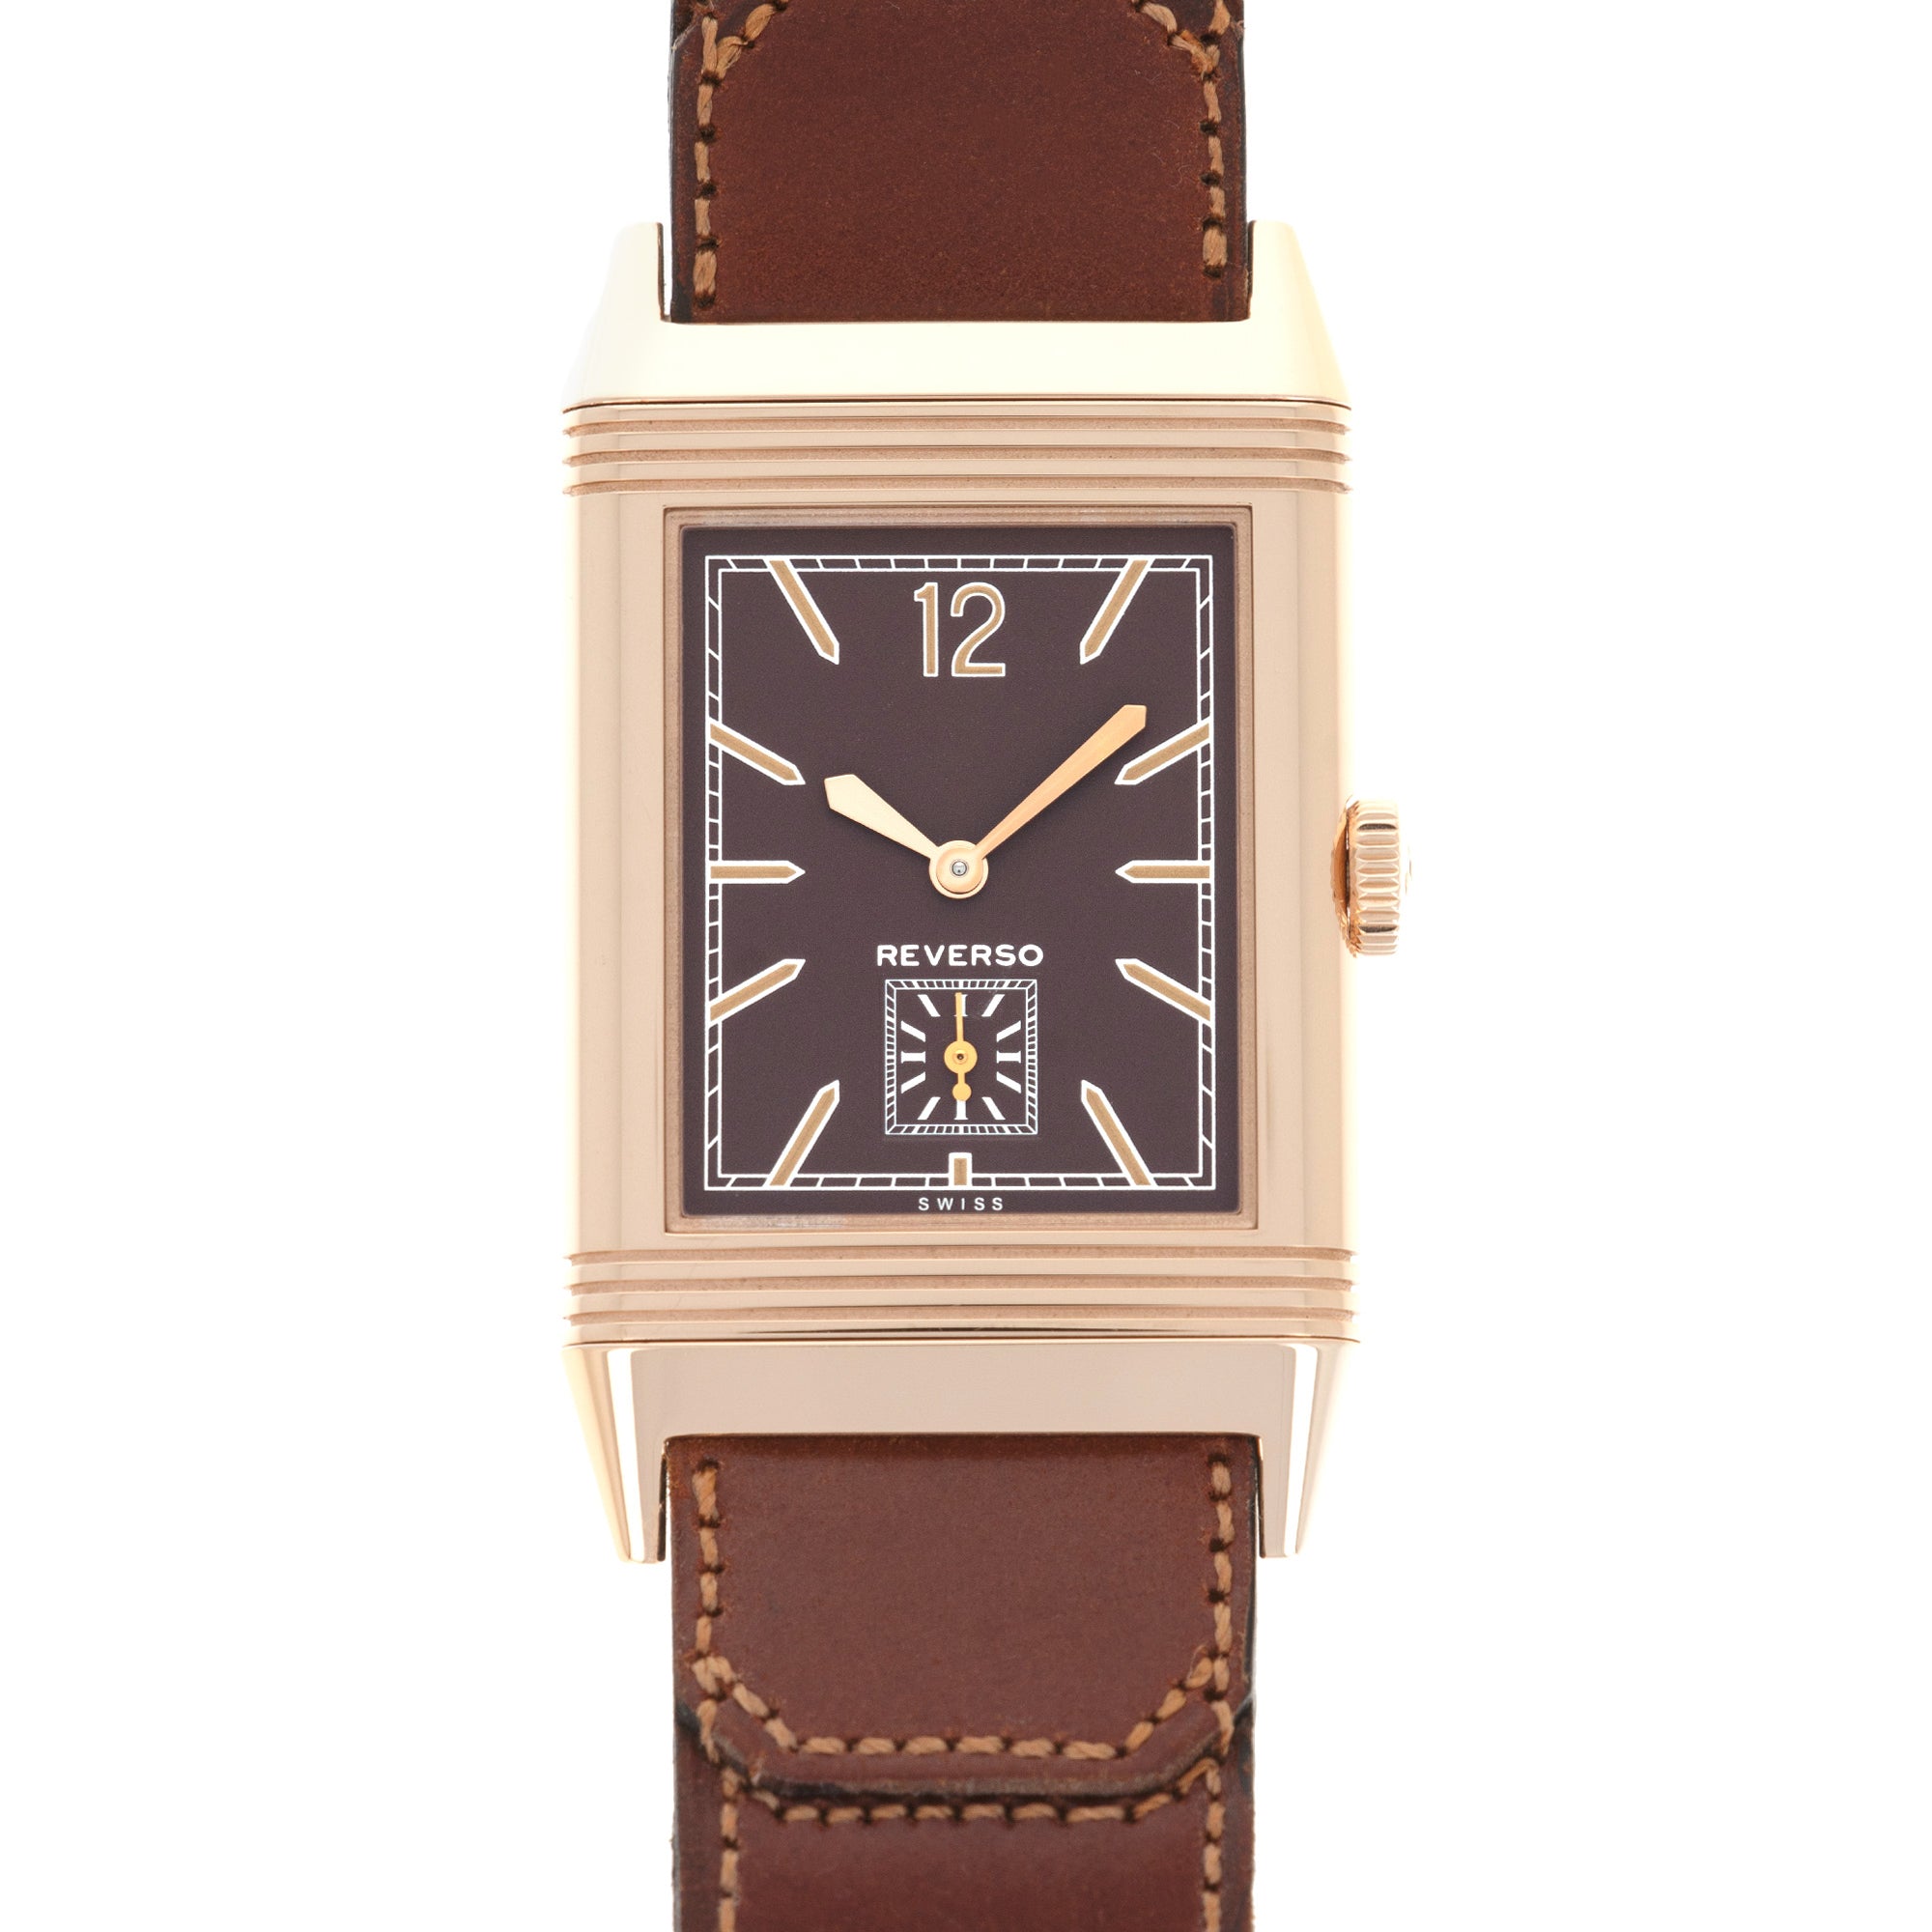 Jaeger LeCoultre - Jaeger LeCoultre Rose Gold Grand Reverso Ultra Thin 1931 Watch - The Keystone Watches